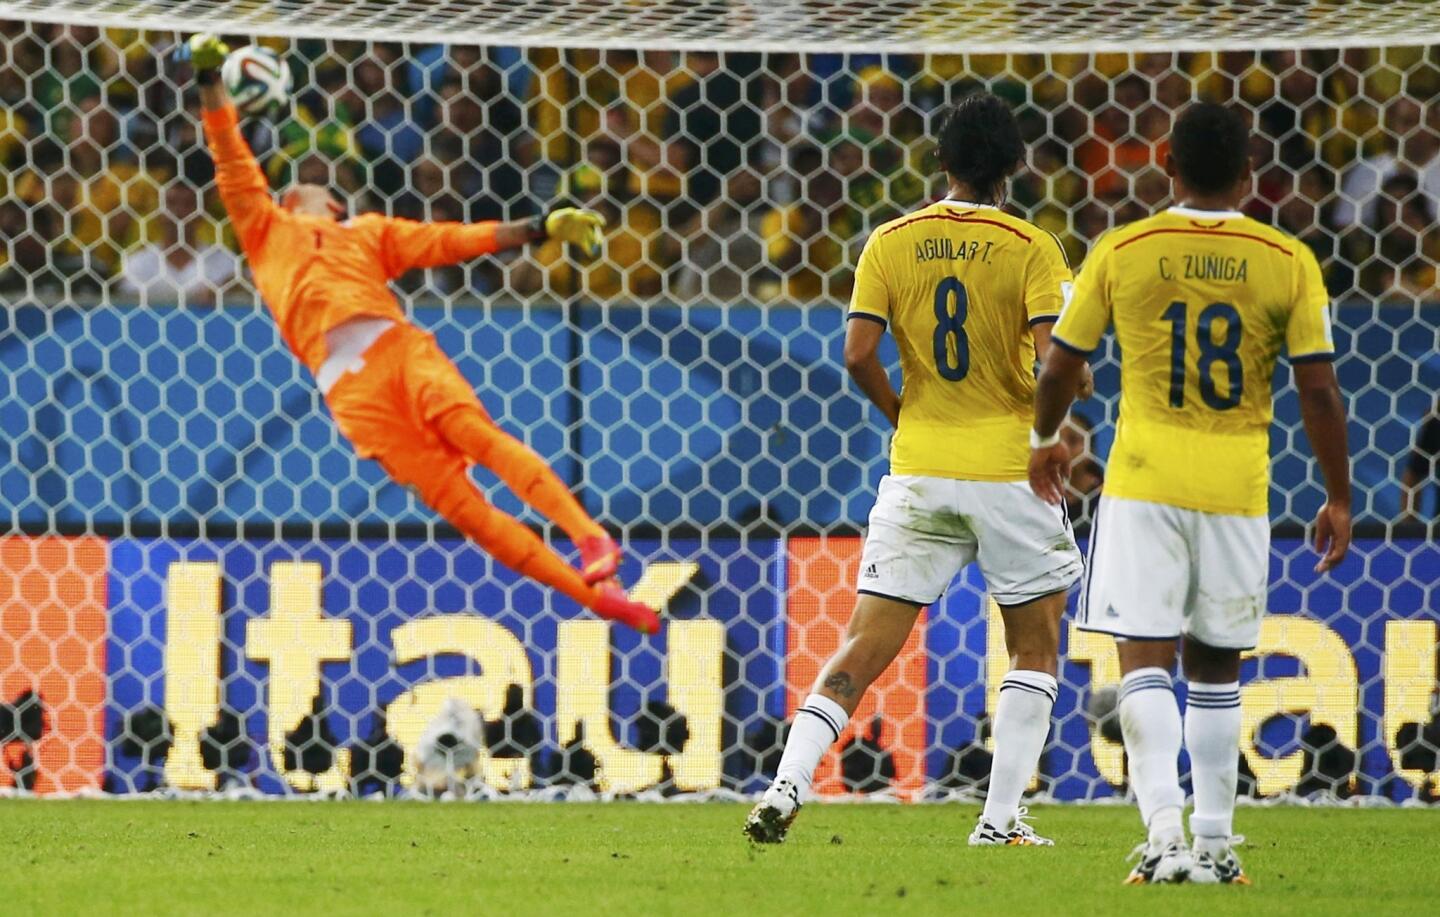 Colombia's Aguilar and Zuniga watch as James' volley beats Uruguay's Muslera to score during their 2014 World Cup round of 16 game at the Maracana stadium in Rio de Janeiro